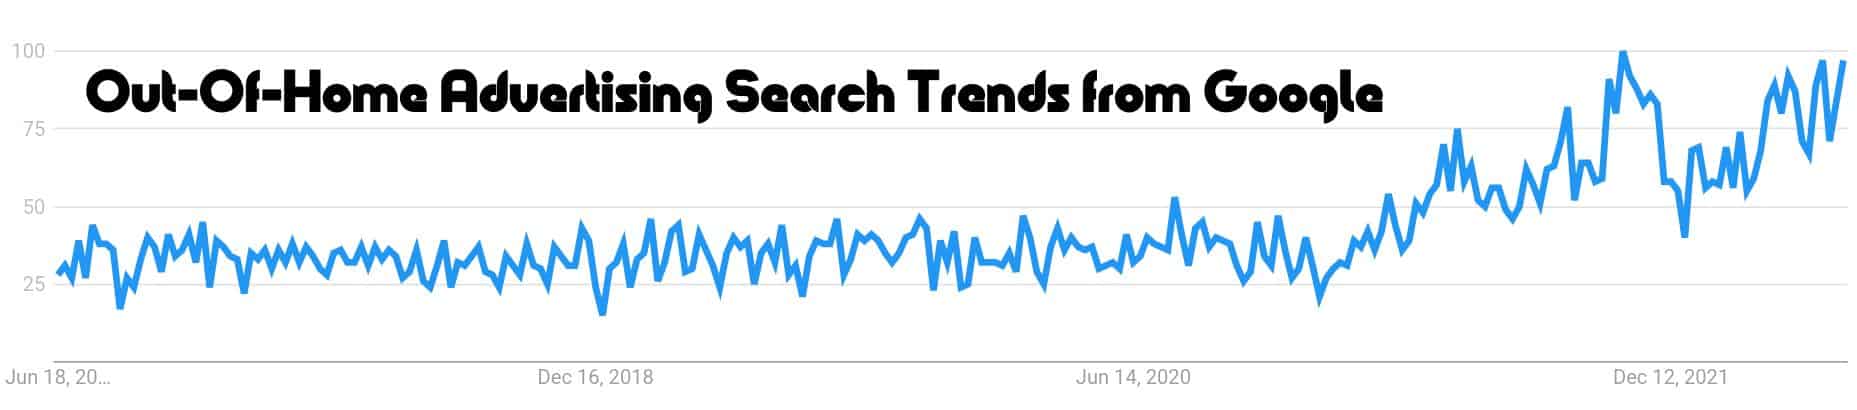 Out-Of-Home Advertising Search Trends